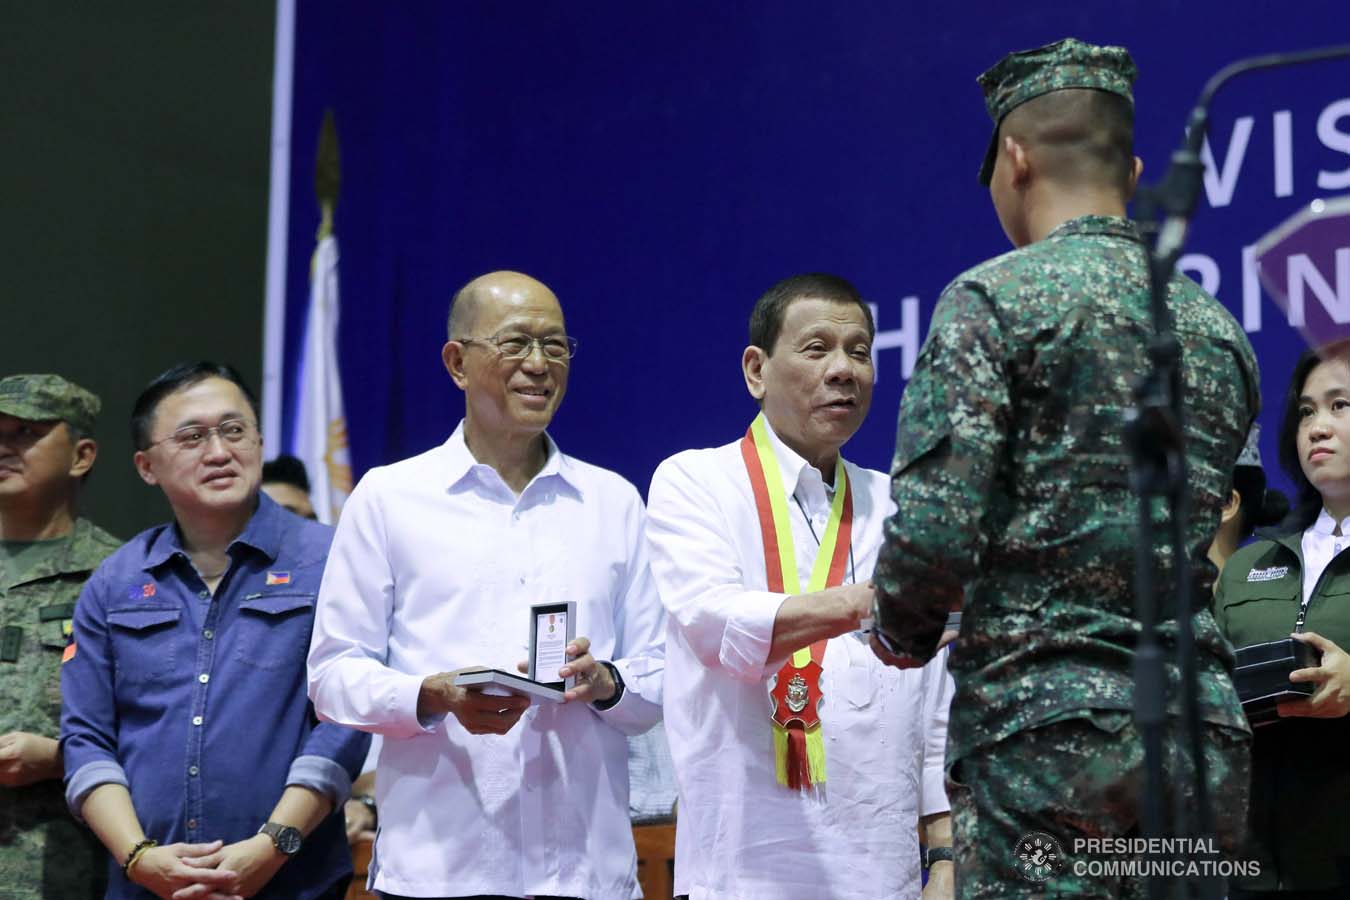 President Rodrigo Roa Duterte confers the Order of Lapu-Lapu Rank of Kamagi on one of the Philippine Marine Corps (PMC) personnel during his visit to the PMC headquarters at Fort Bonifacio in Taguig City on January 13, 2020. The President honored the PMC personnel who took part in the liberation of Marawi City from the terrorists. ALFRED FRIAS/PRESIDENTIAL PHOTO